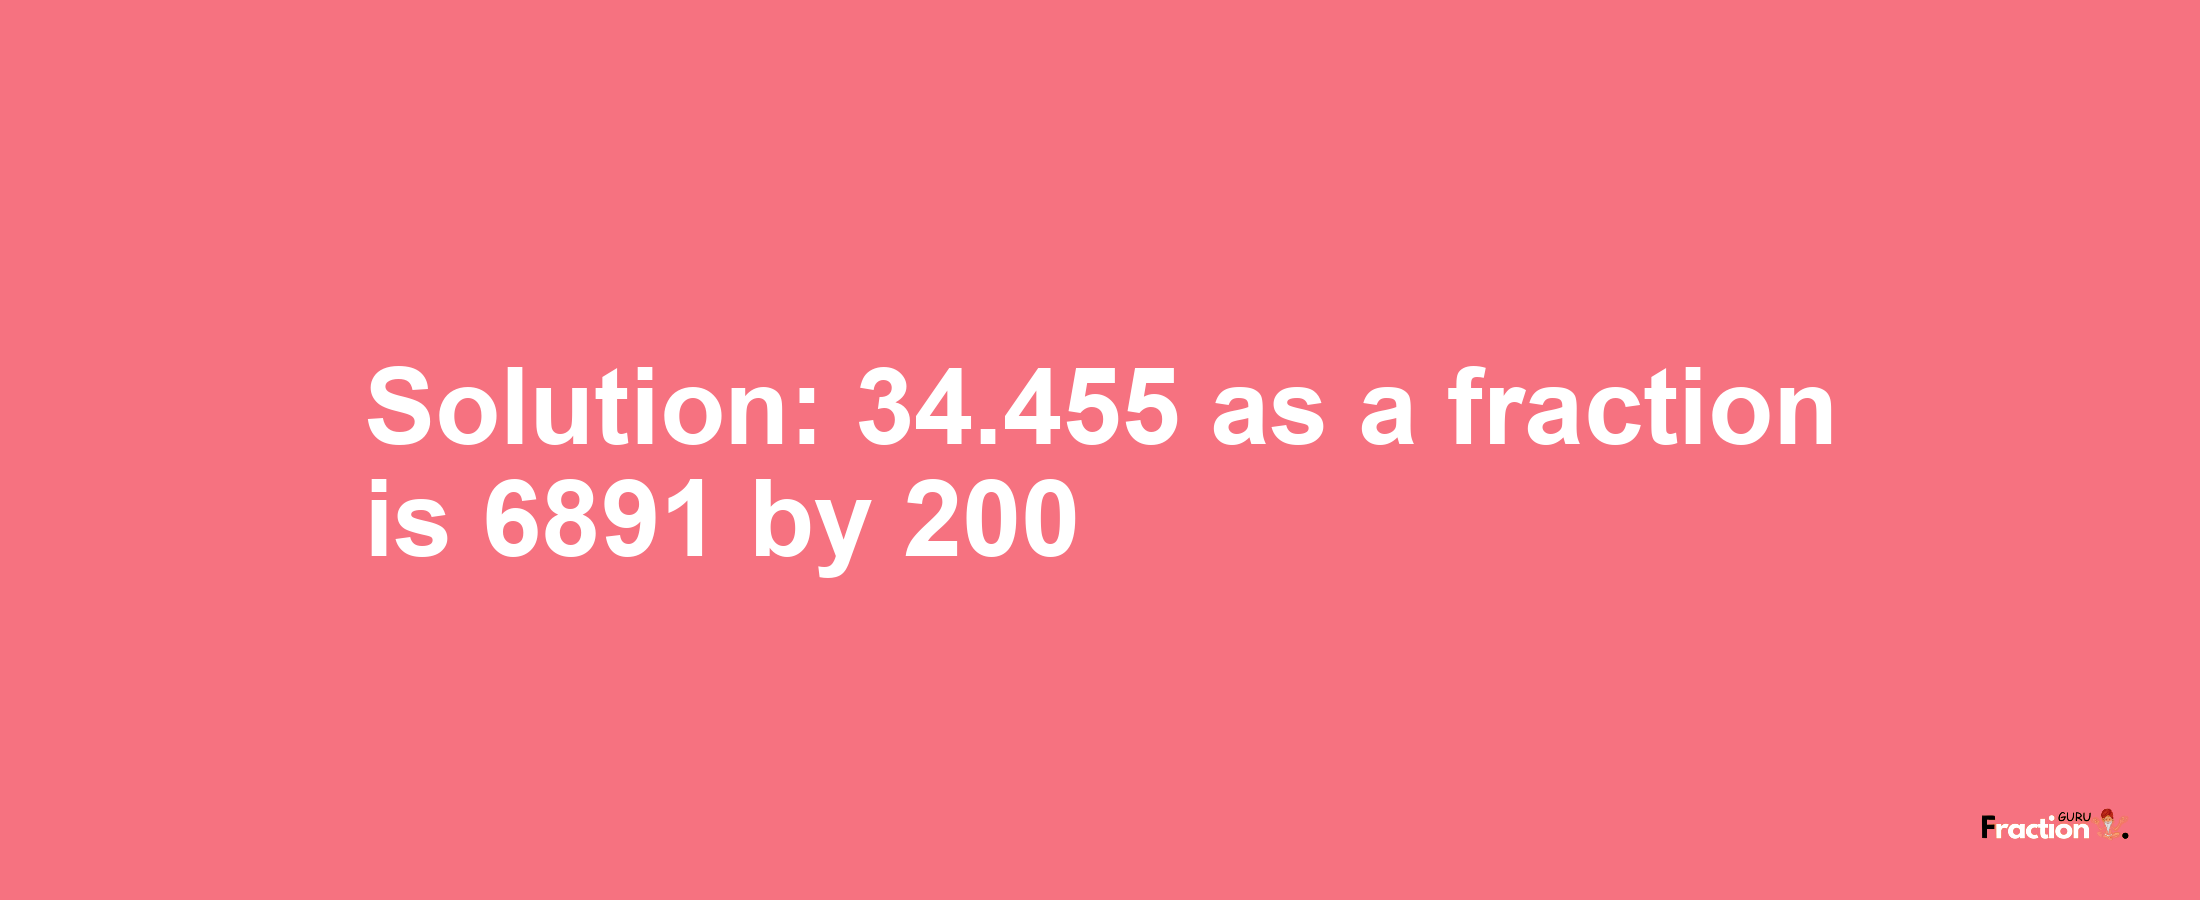 Solution:34.455 as a fraction is 6891/200